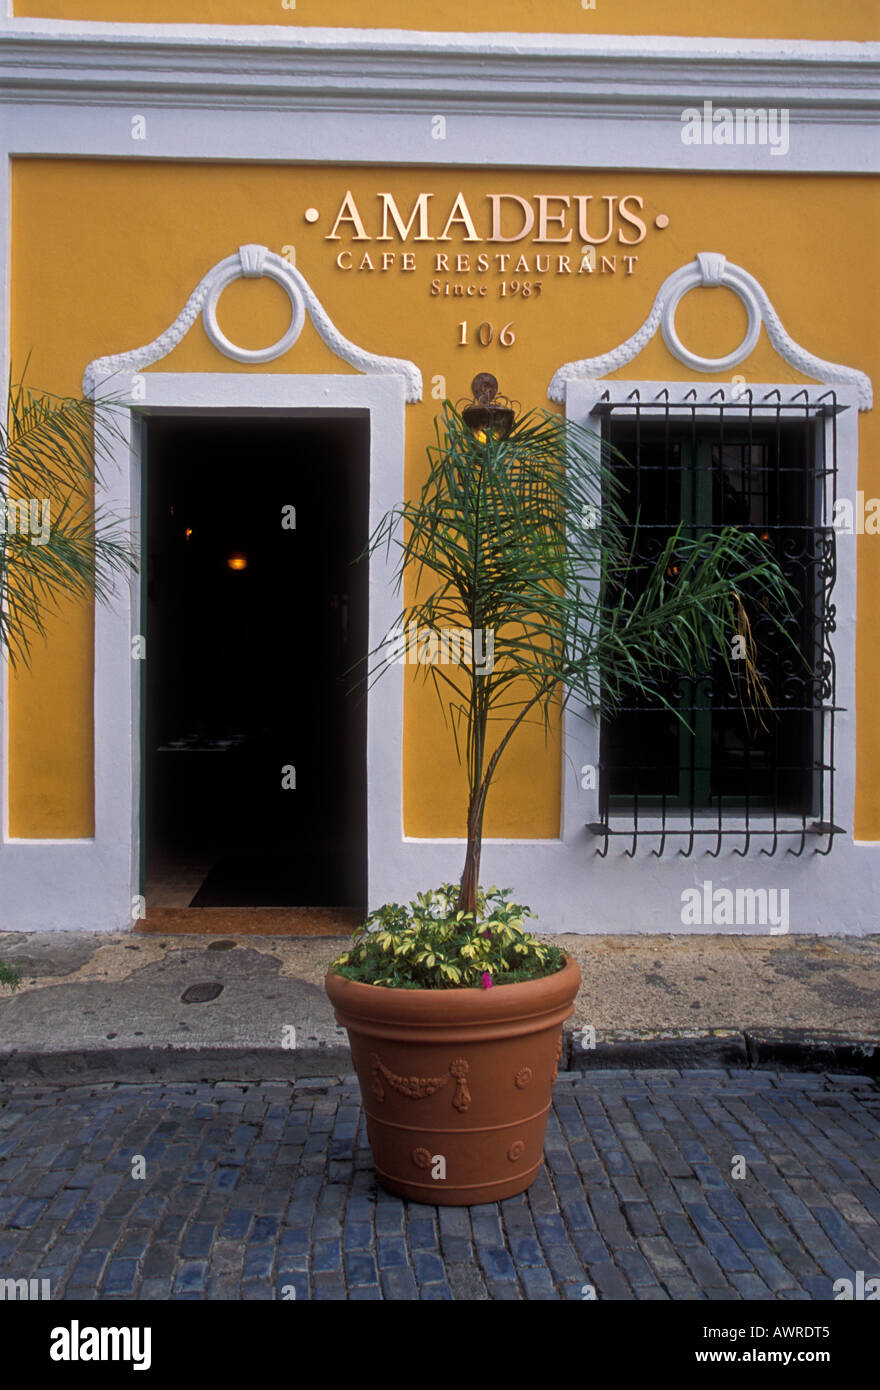 Amadeus Cafe Restaurant, fine dining, dining, Puerto Rican food and drink, food and drink, Old San Juan, San Juan, Puerto Rico, West Indies Stock Photo